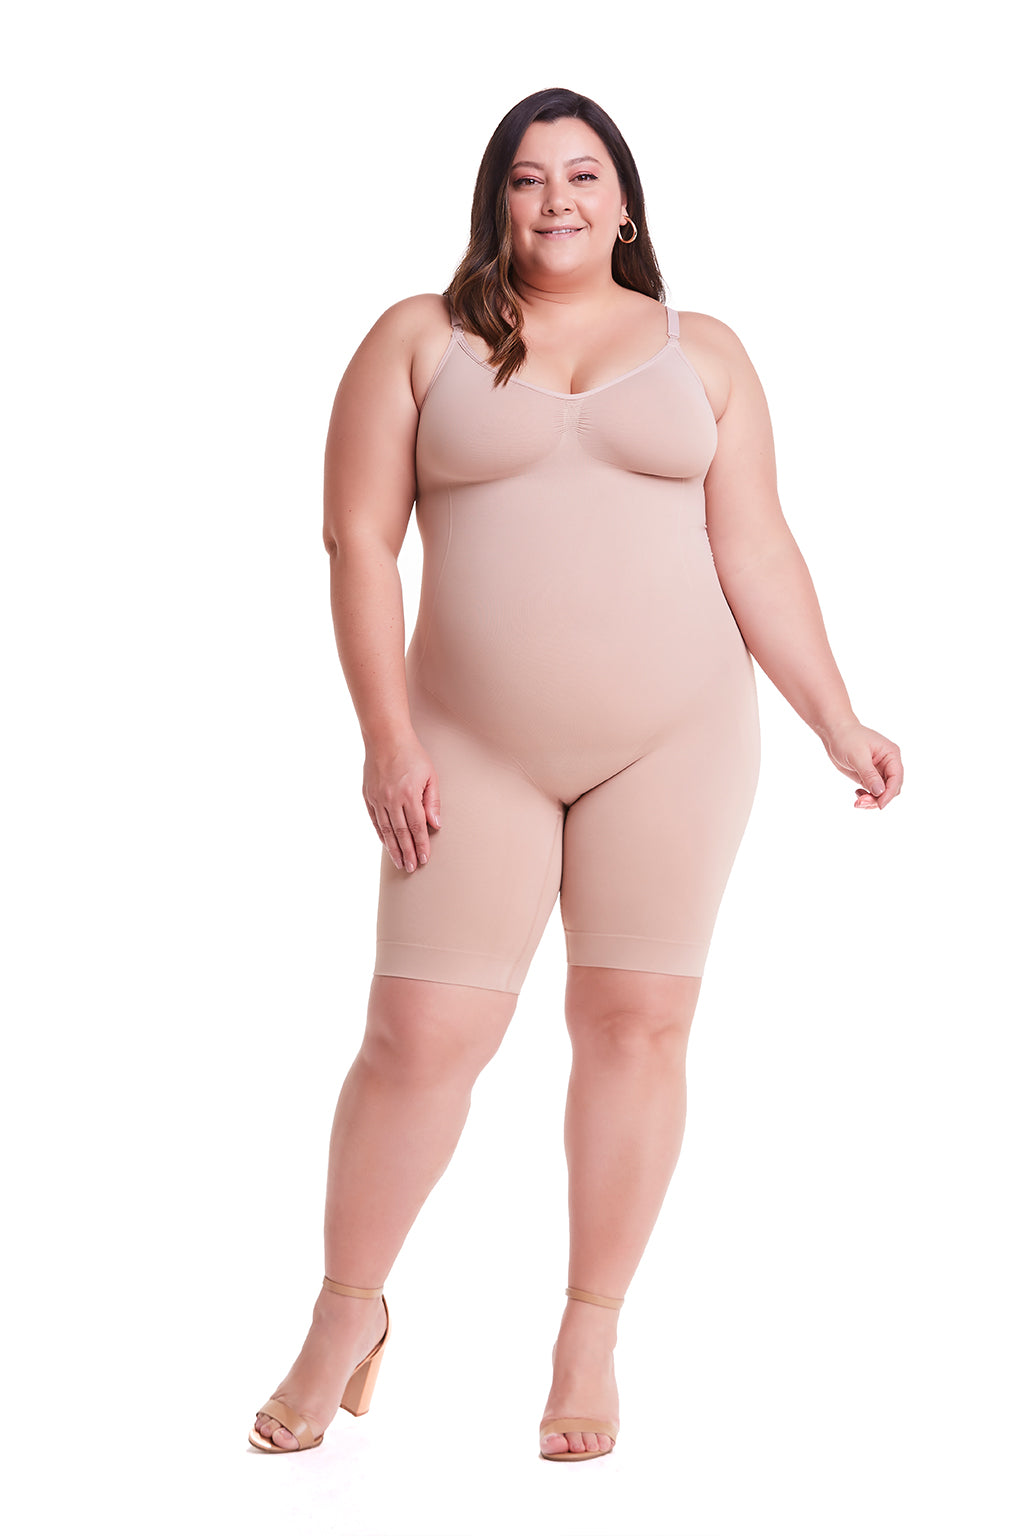 Plus Size XS-5XL Slimming Seamless Invisible Full Body Shaper High